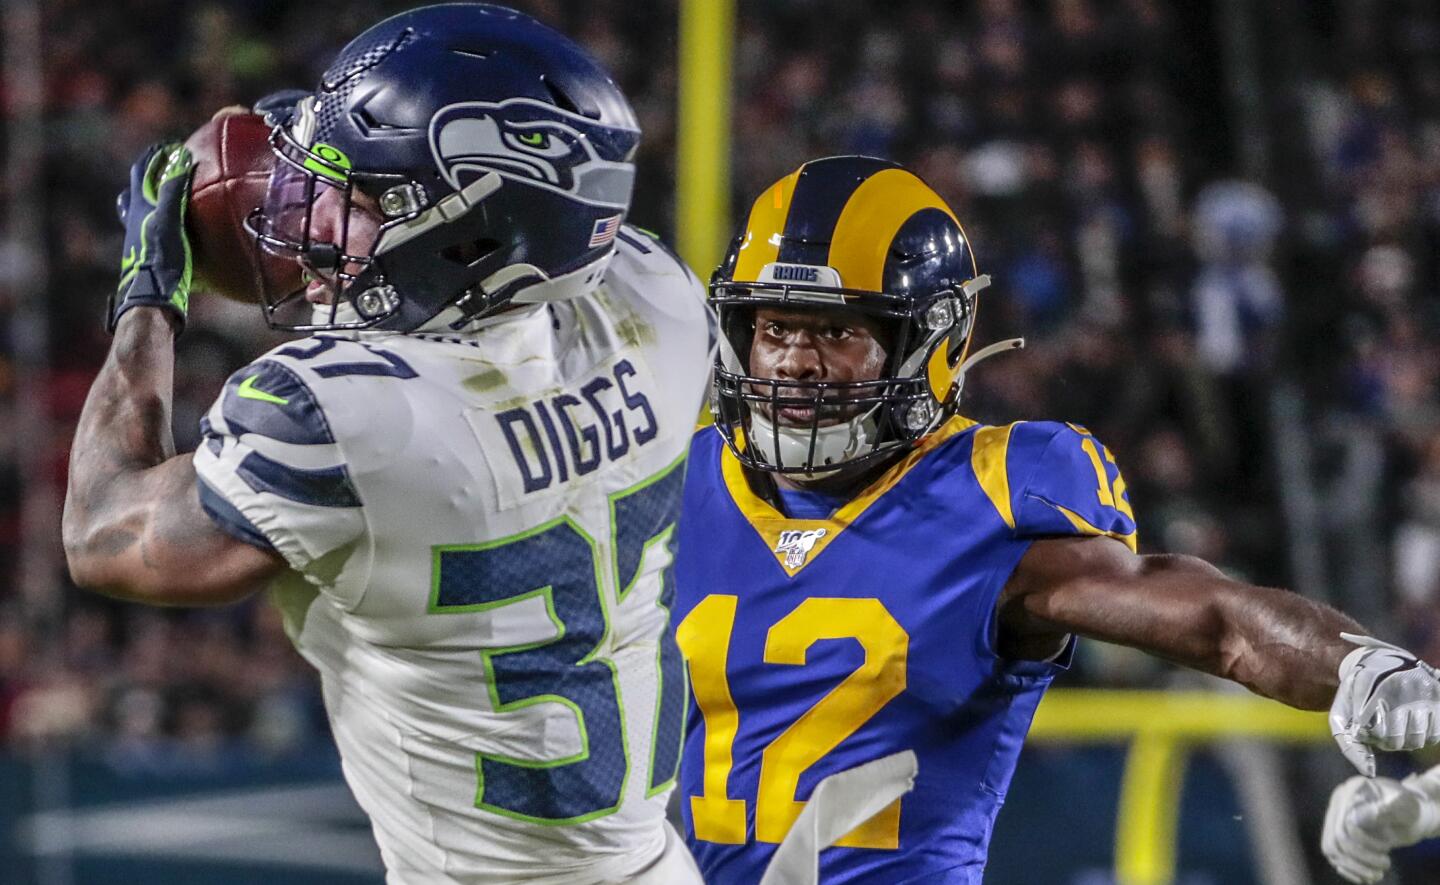 Seattle Seahawks cornerback Quandre Diggs intercepts a pass intended for Rams wide receiver Brandin Cooks.